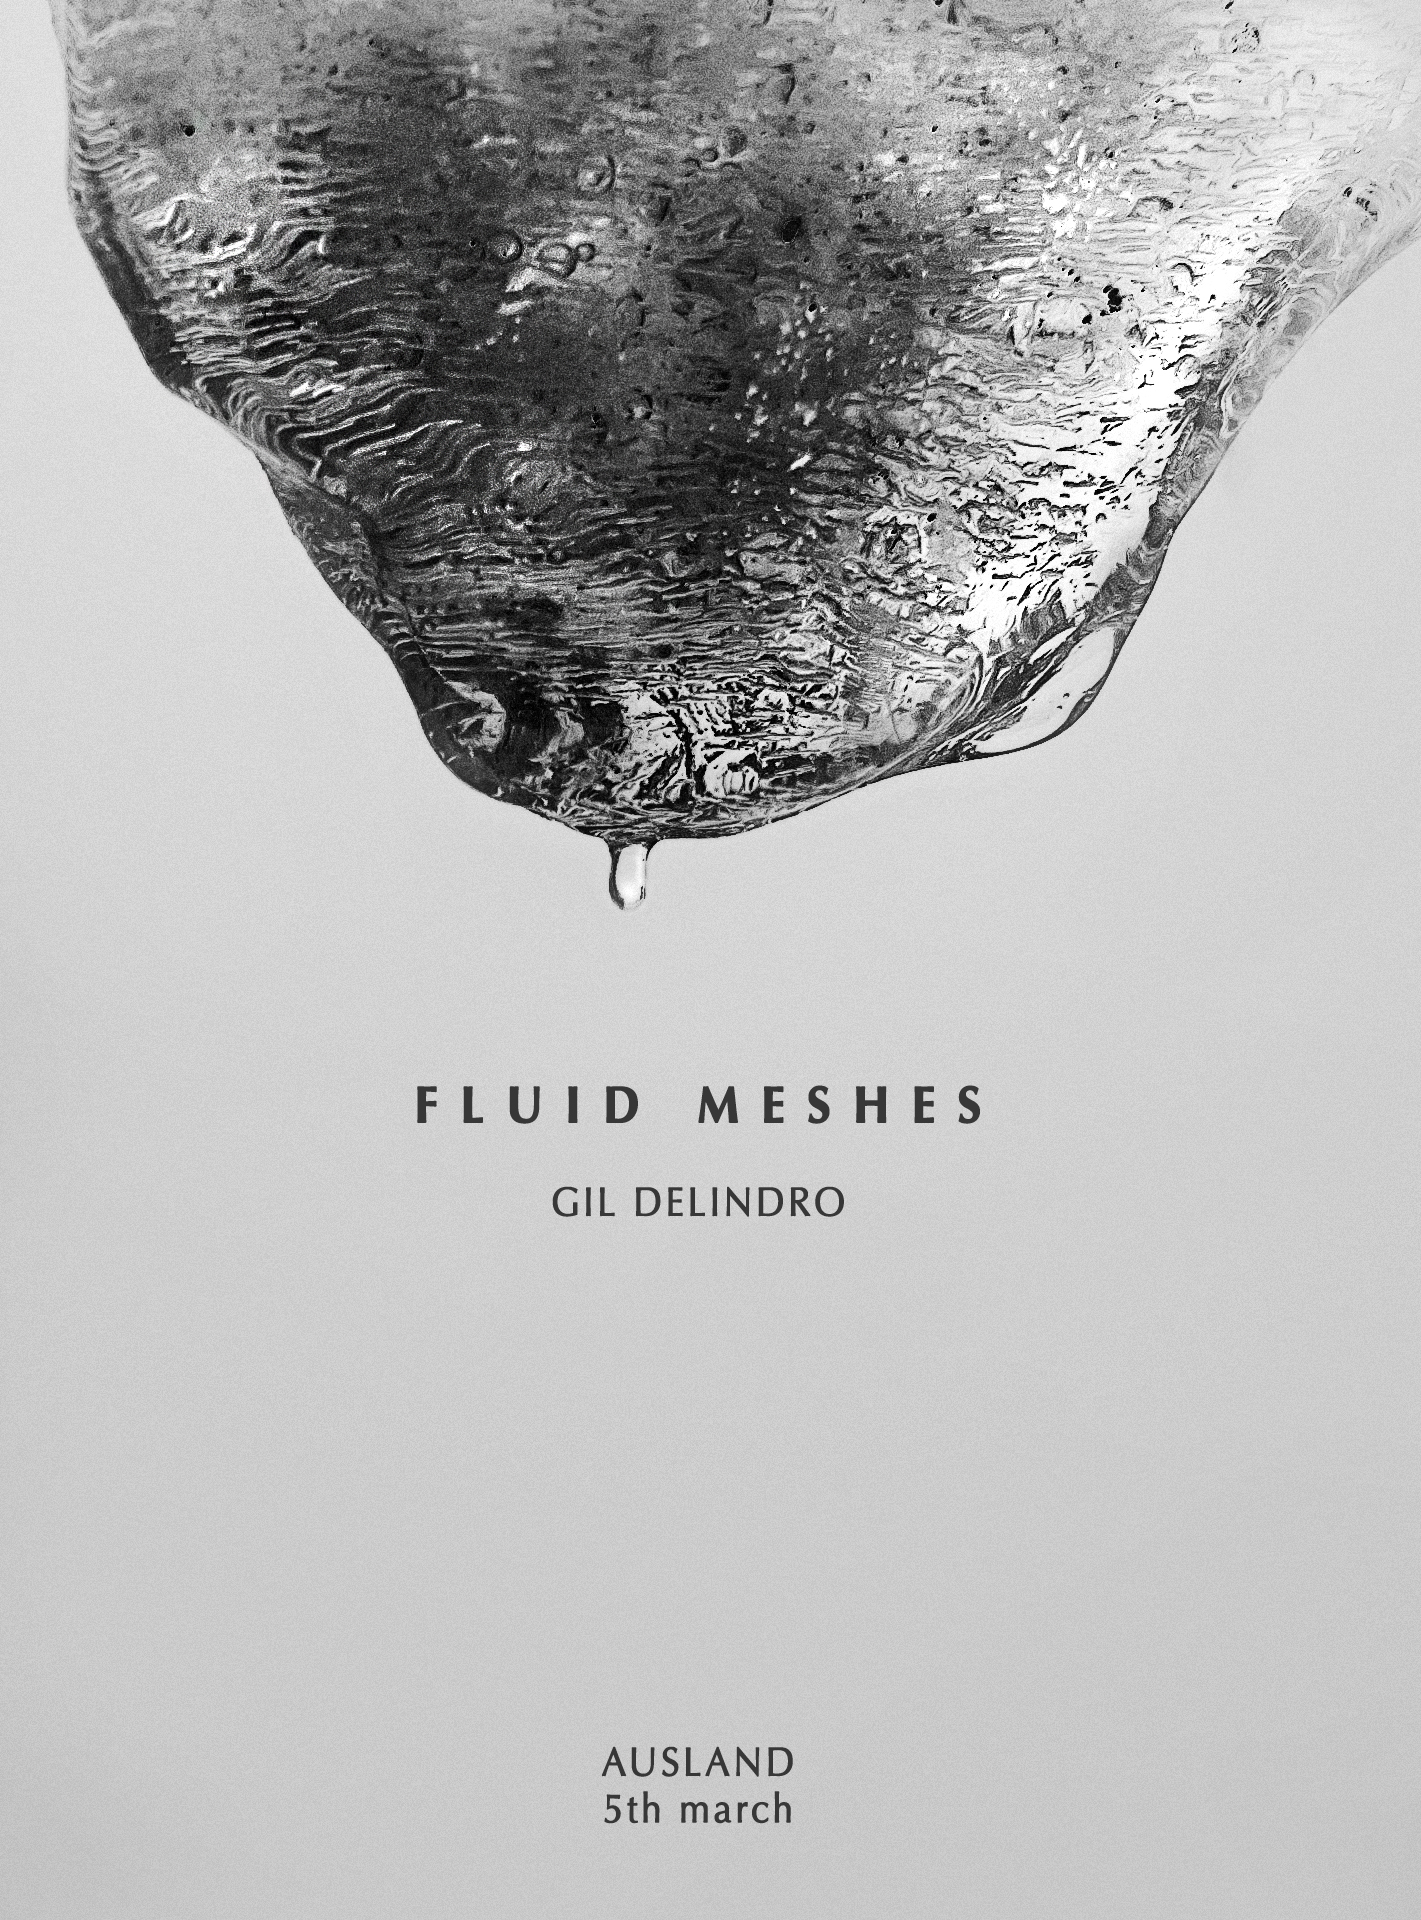 Image for "Fluid Meshes" sound installation by Gil Delindro